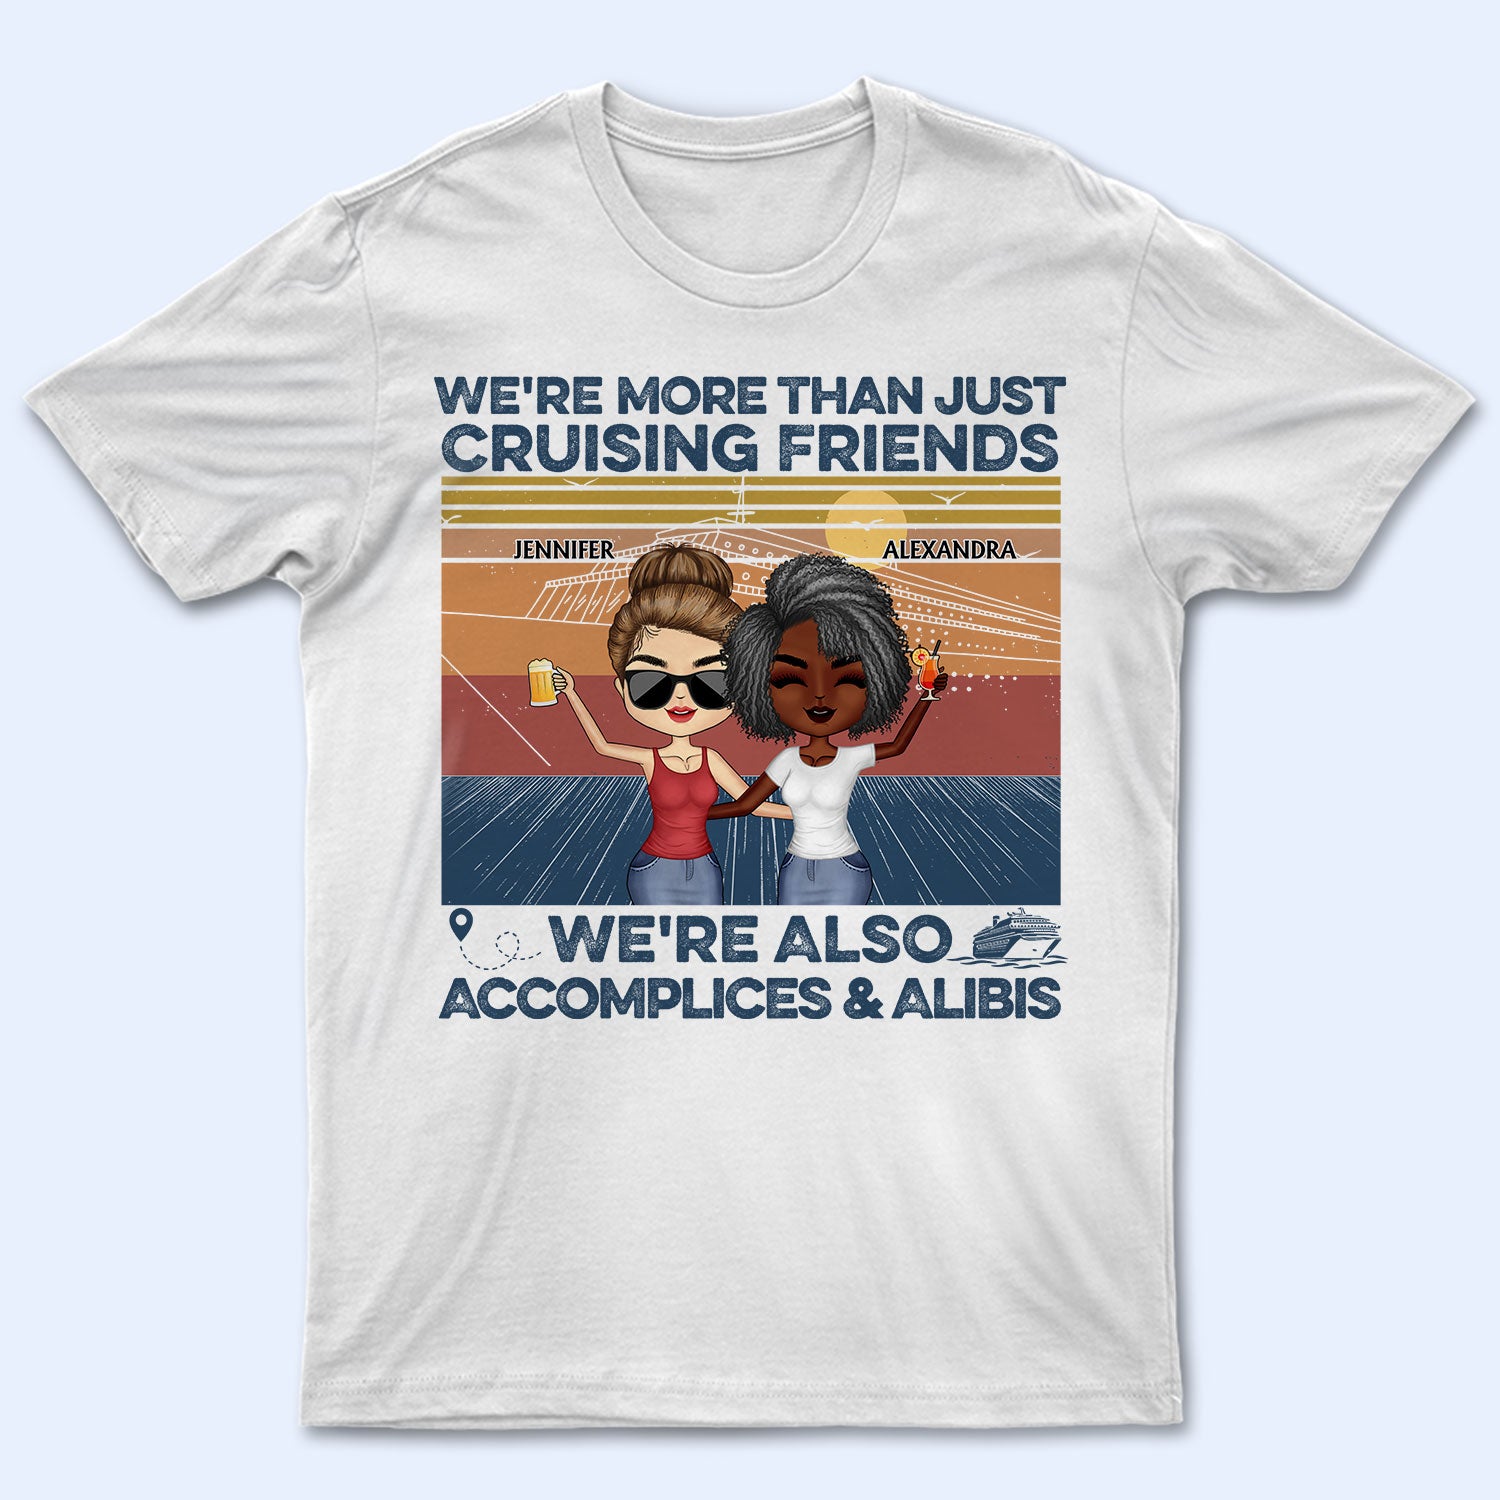 We're More Than Just Cruising Friends - Traveling Gift For BFF, Siblings, Colleagues - Personalized Custom T Shirt